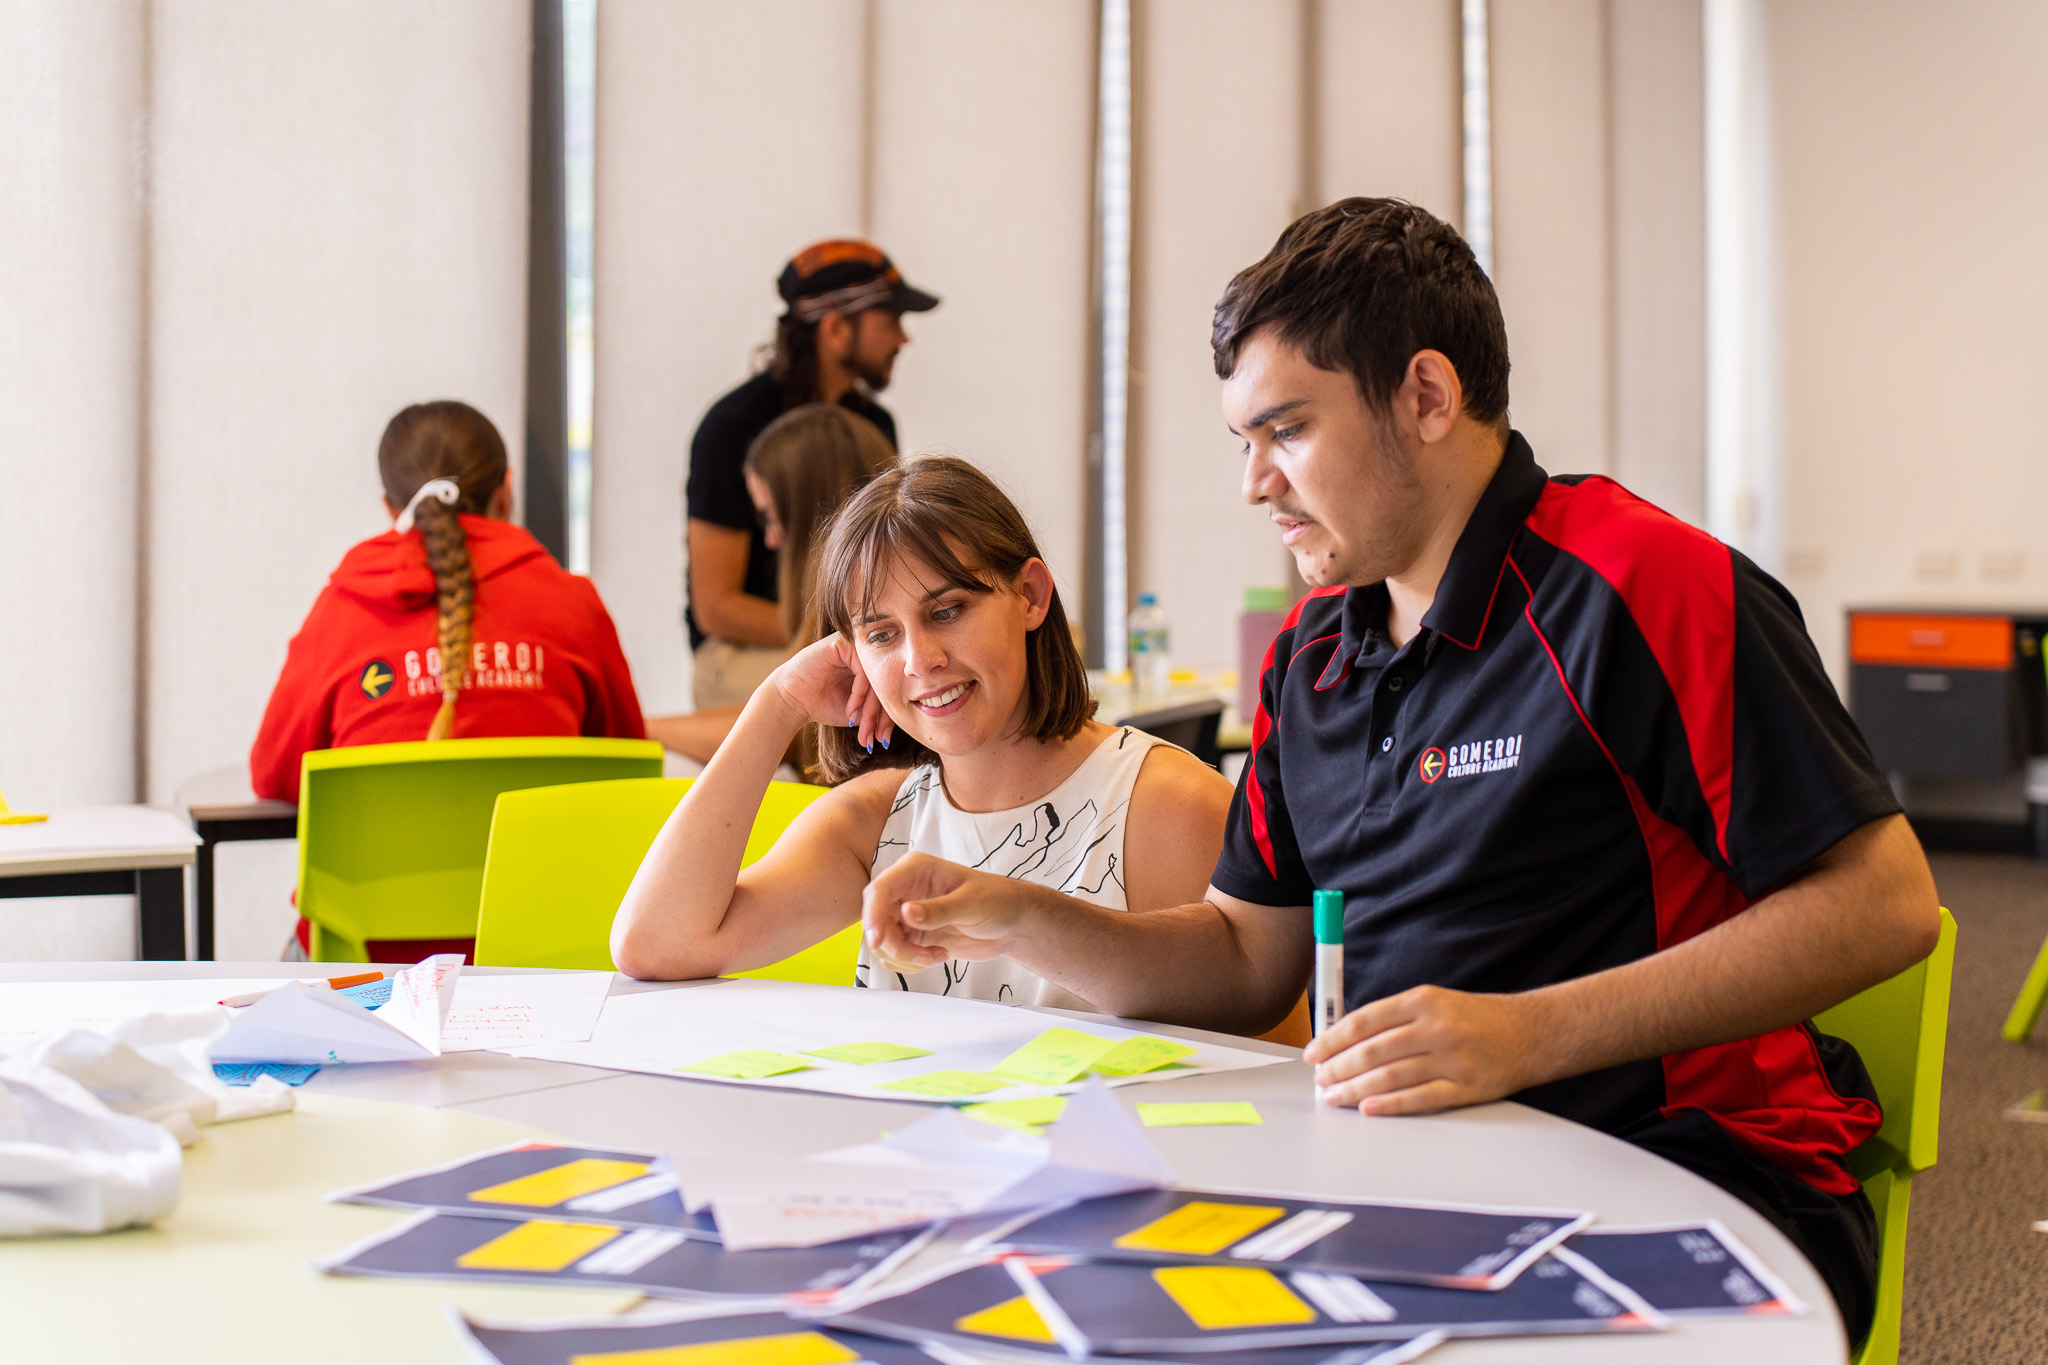 Invest in Yourself program facilitator with student from Gomeroi Culture Academy